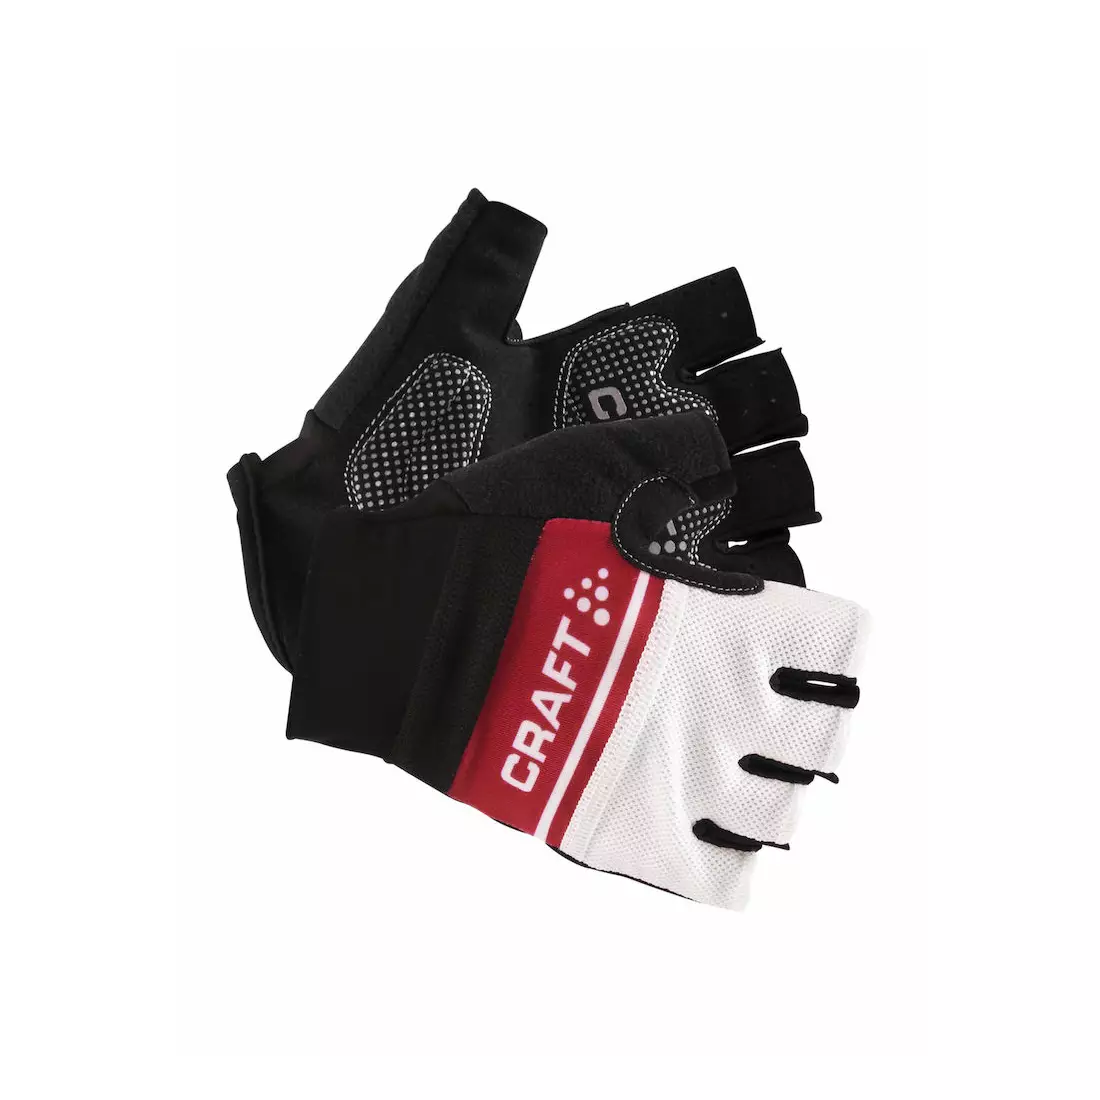 CRAFT CLASSIC GLOVE men's cycling gloves 1903304-9430